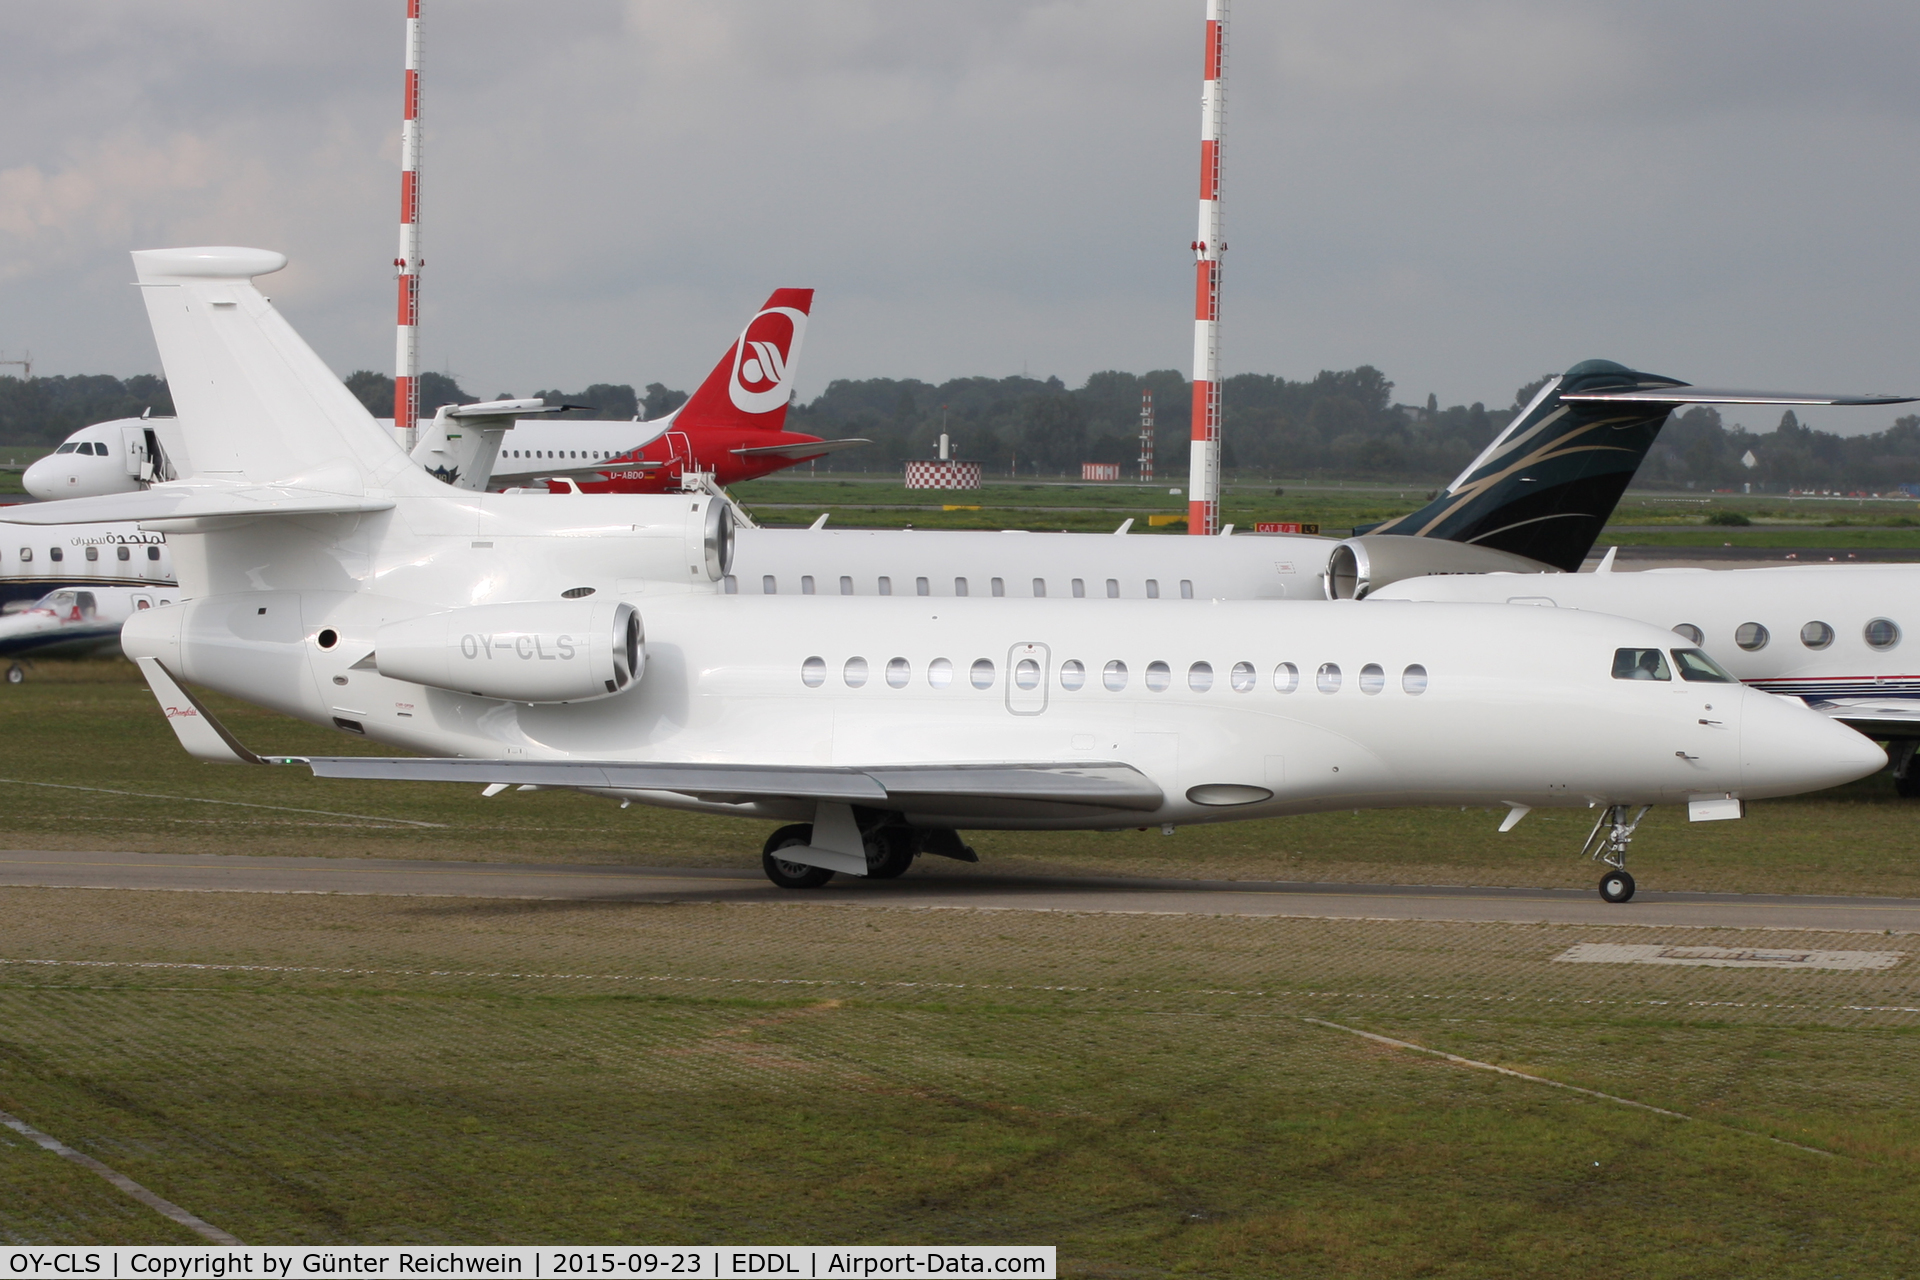 OY-CLS, 2012 Dassault Falcon 7X C/N 155, Taxiing